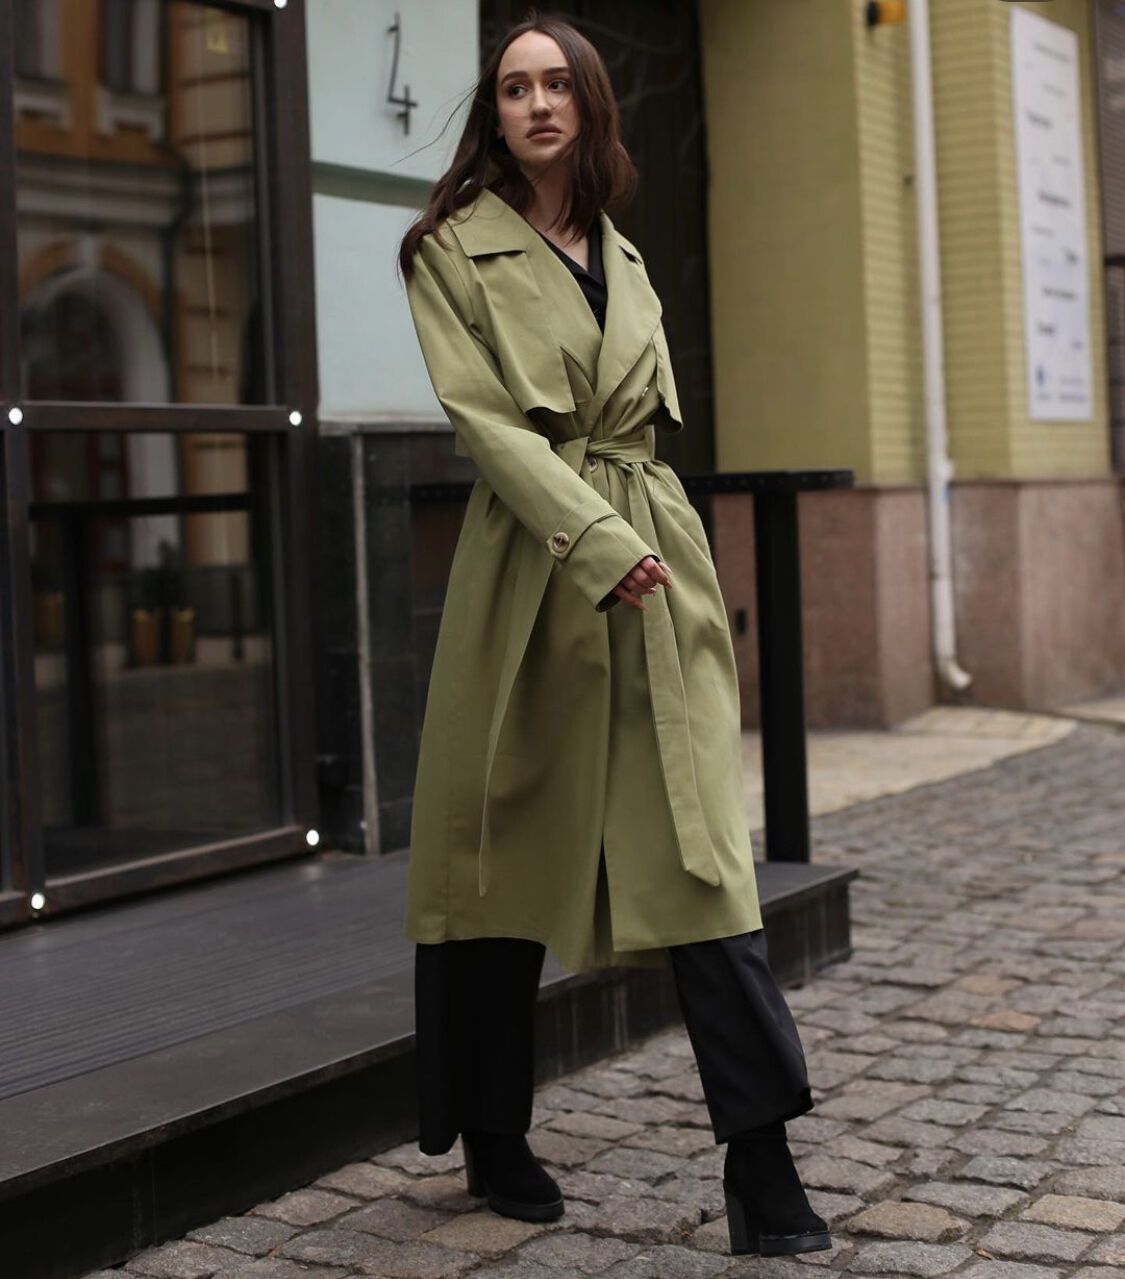 Olive color is on trend